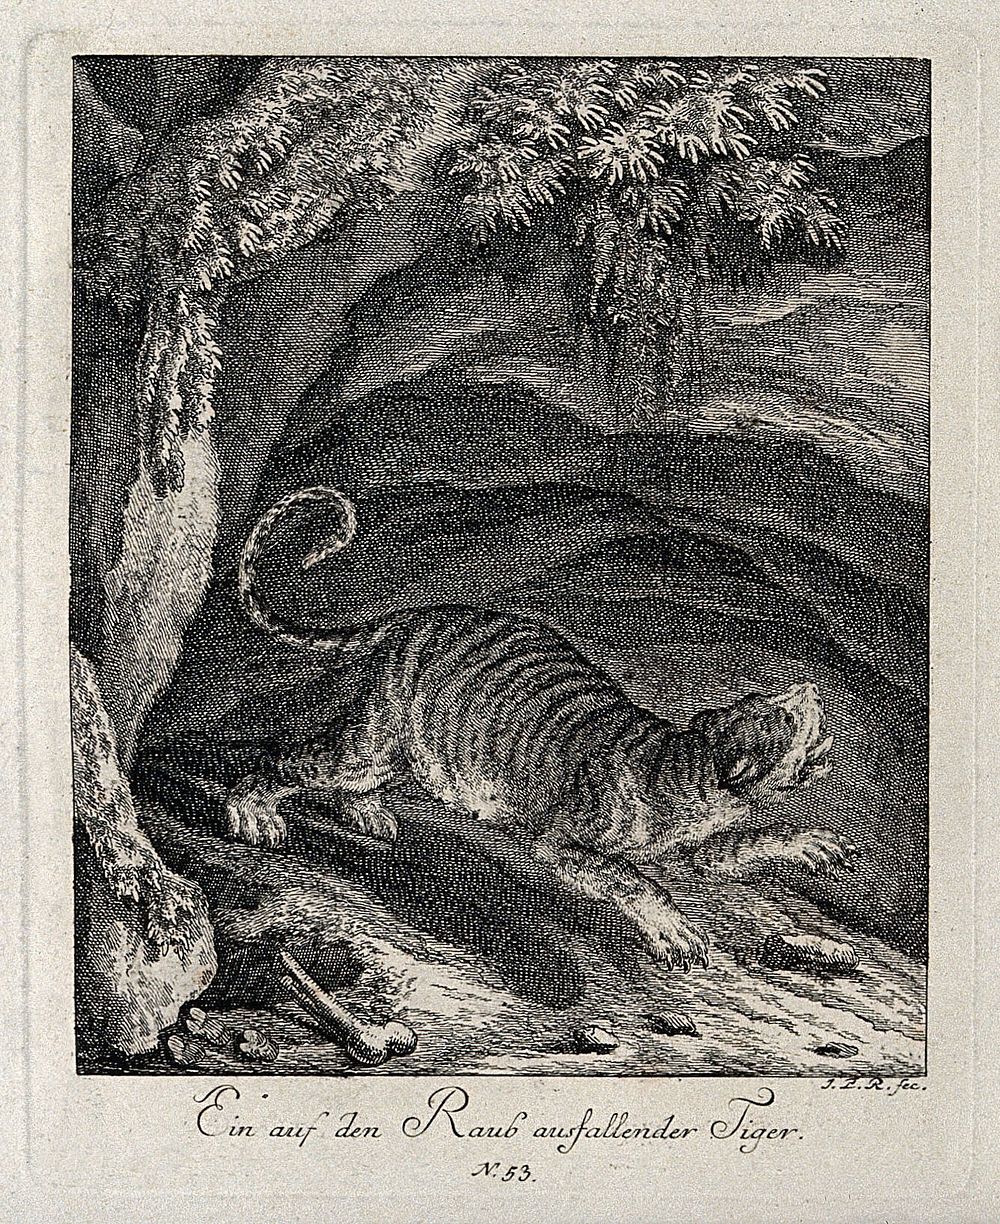 A tiger about to pounce on its prey. Etching by J. E. Ridinger.